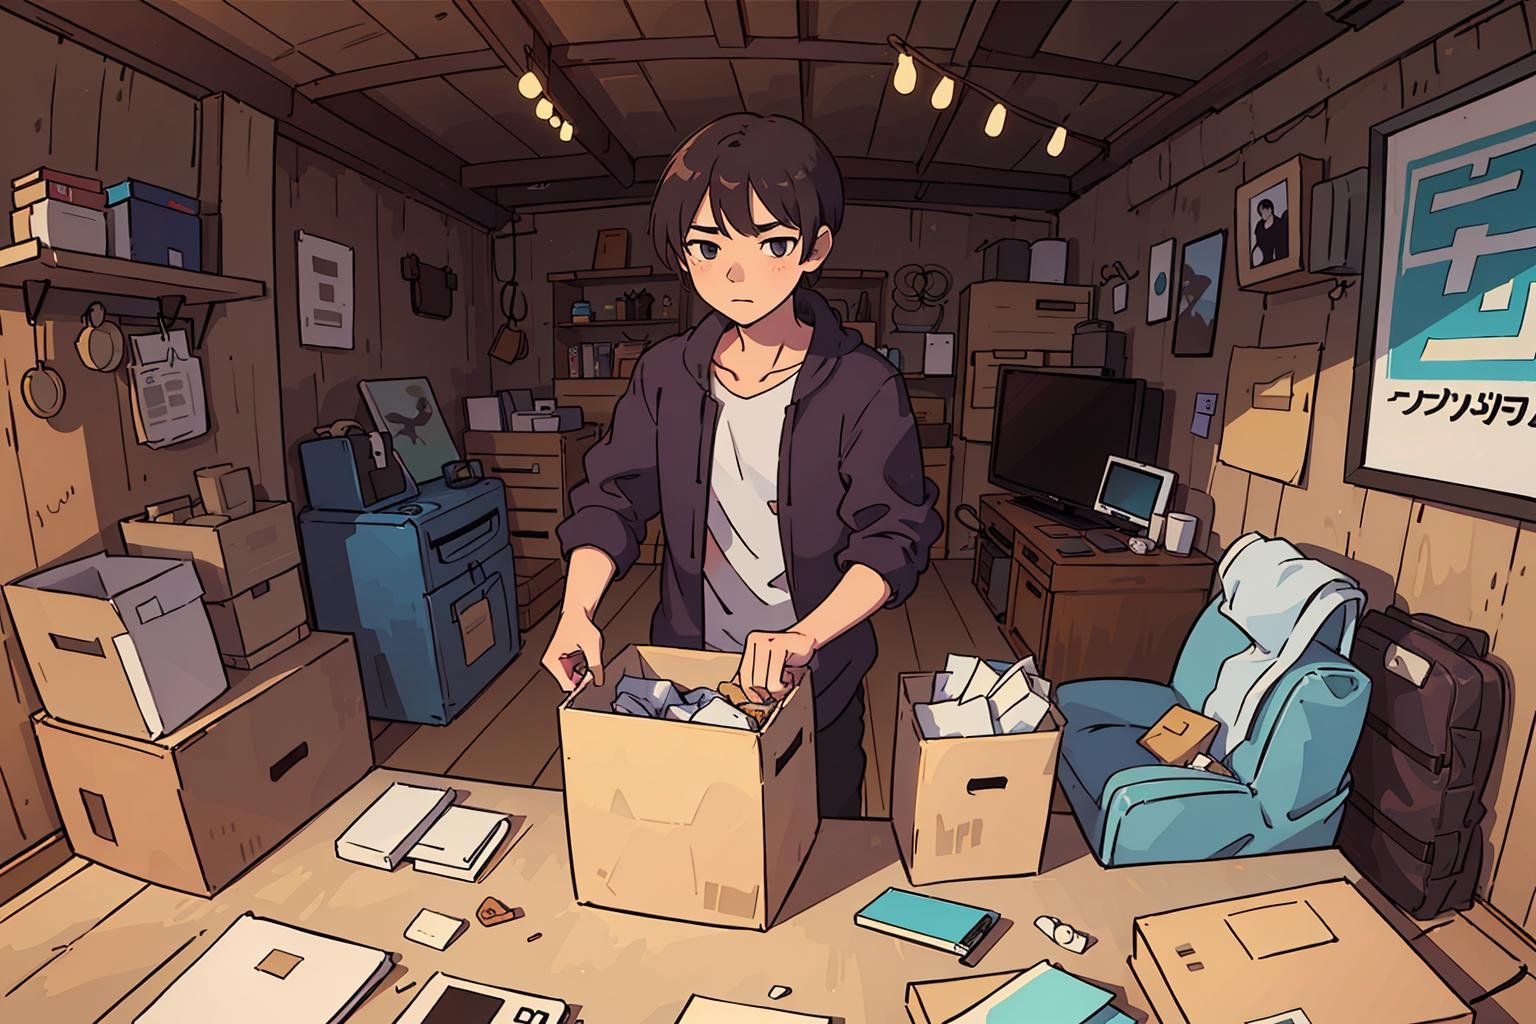 (best quality:0.8) perfect anime illustration, a man opening a box filled with junk in his basement